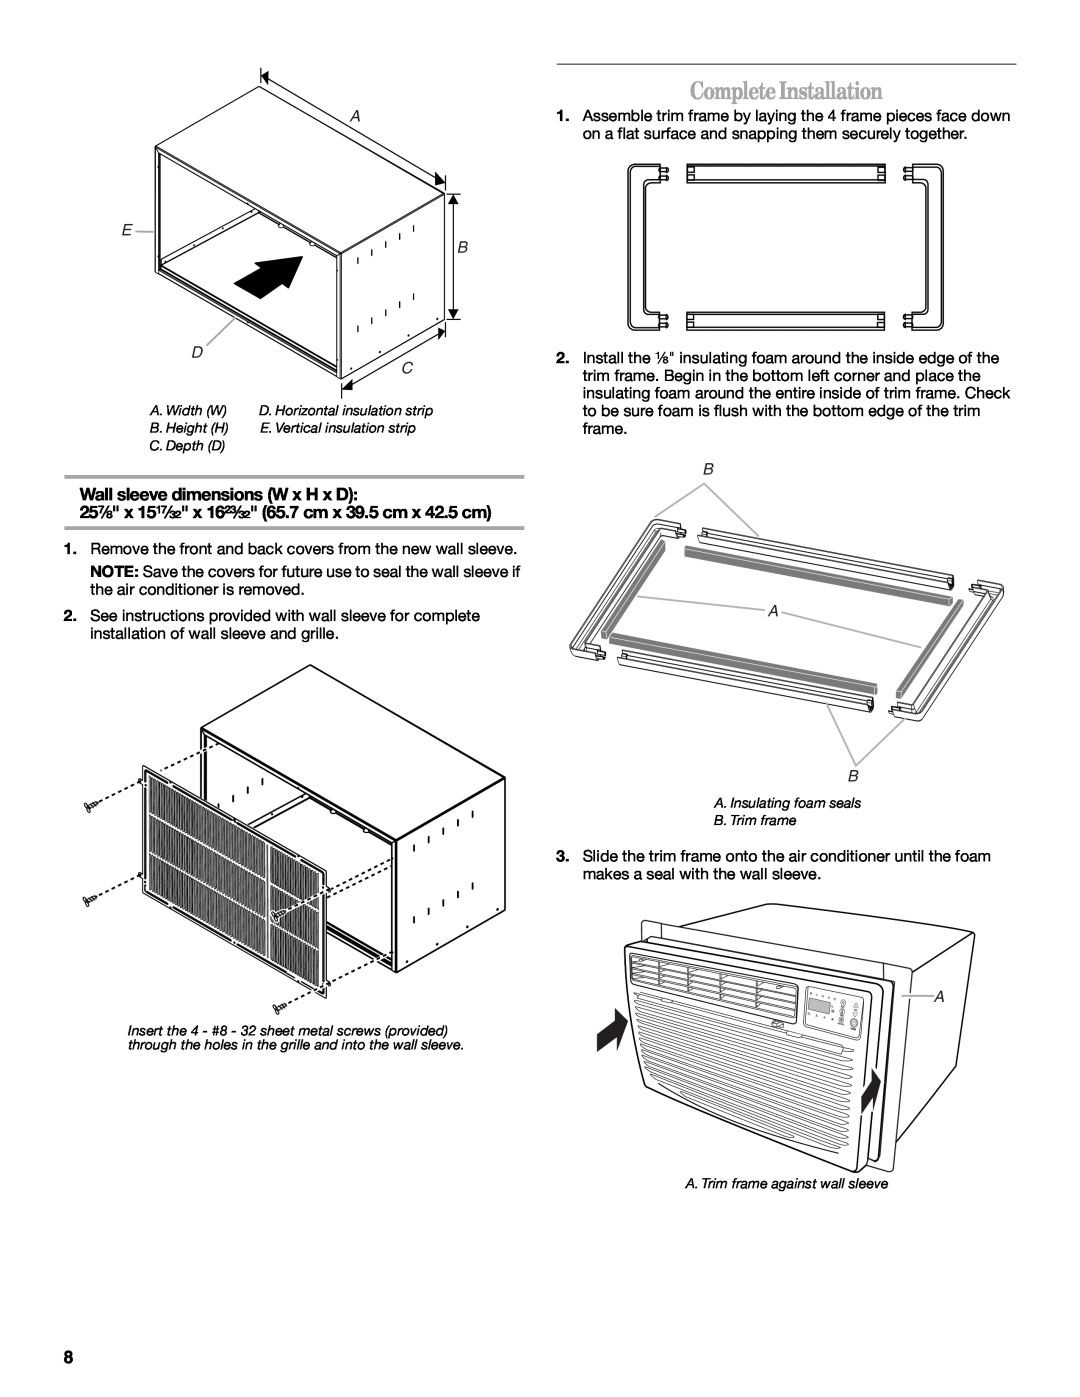 Whirlpool 1188177, 819041994 manual CompleteInstallation, Wall sleeve dimensions W x H x D, A E B D C, B A B 